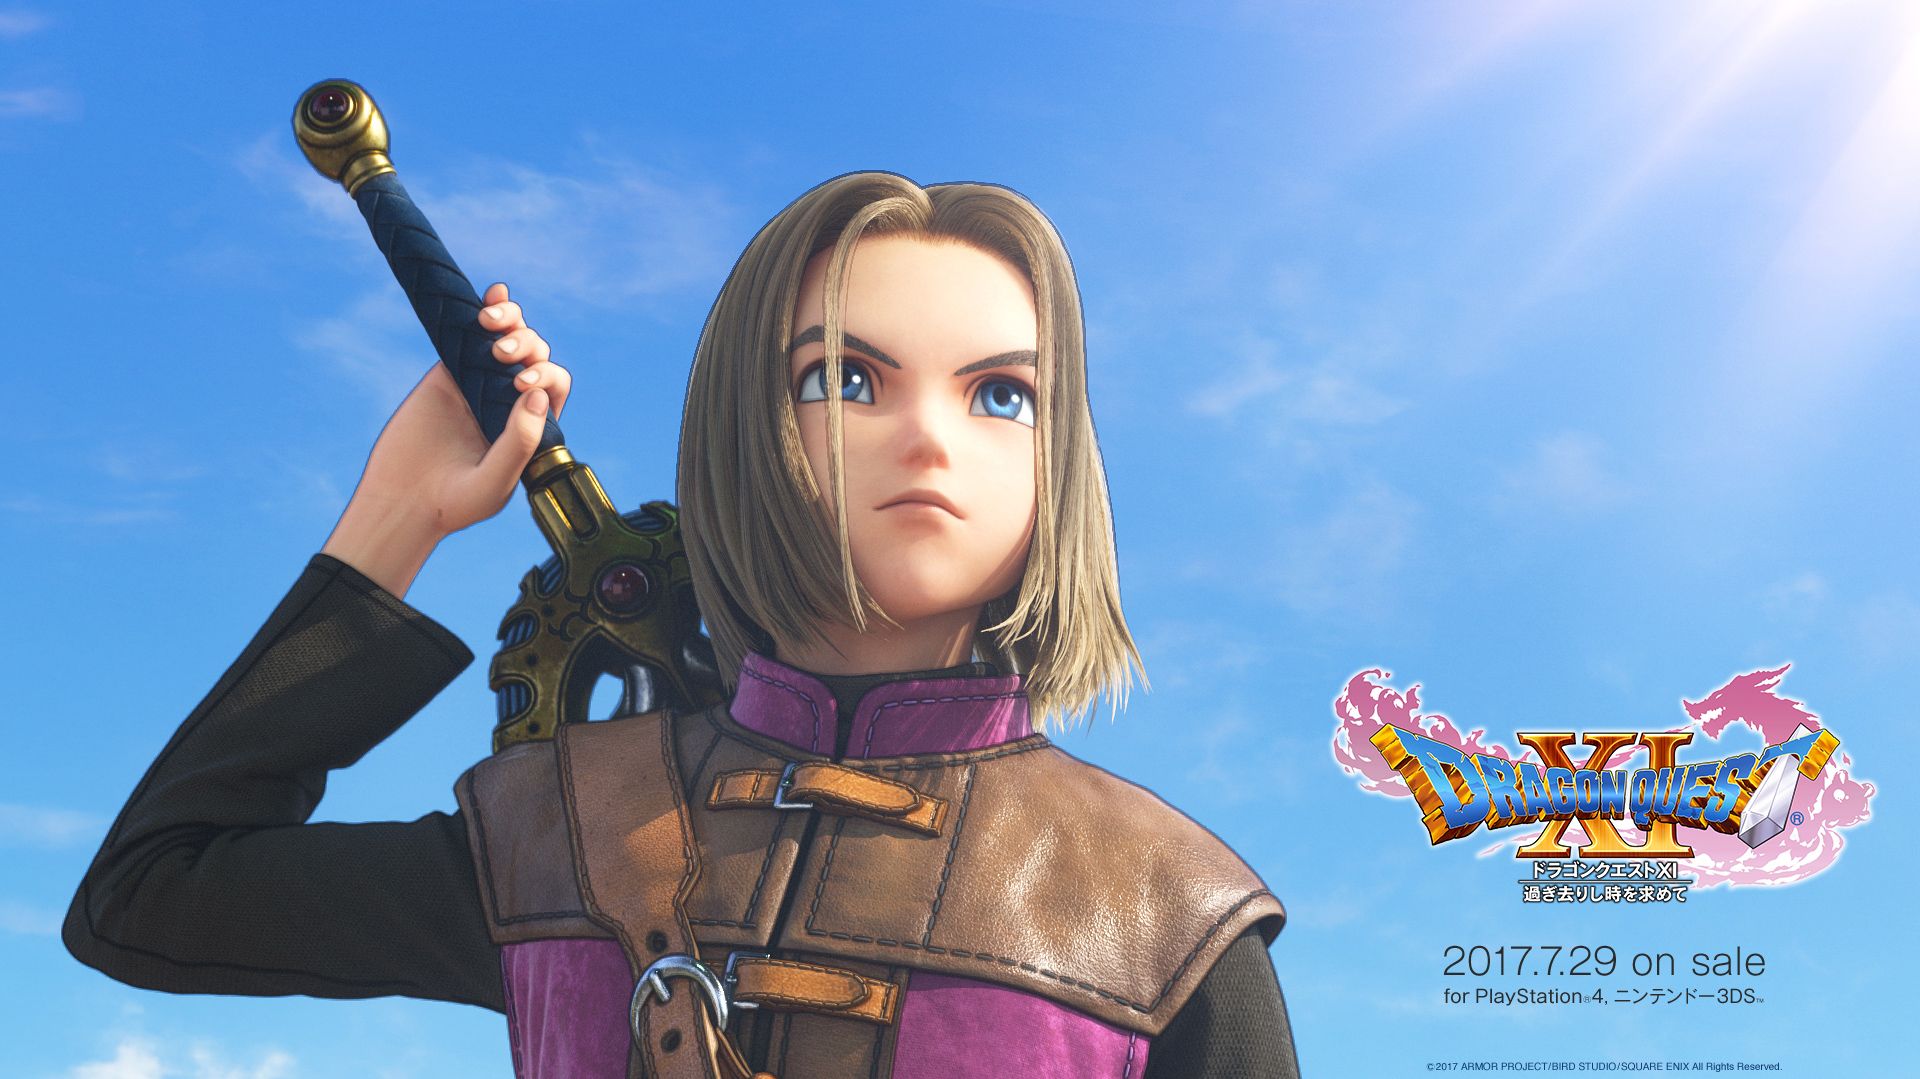 Today Is "Dragon Quest Day" Officially Certified by the Japan